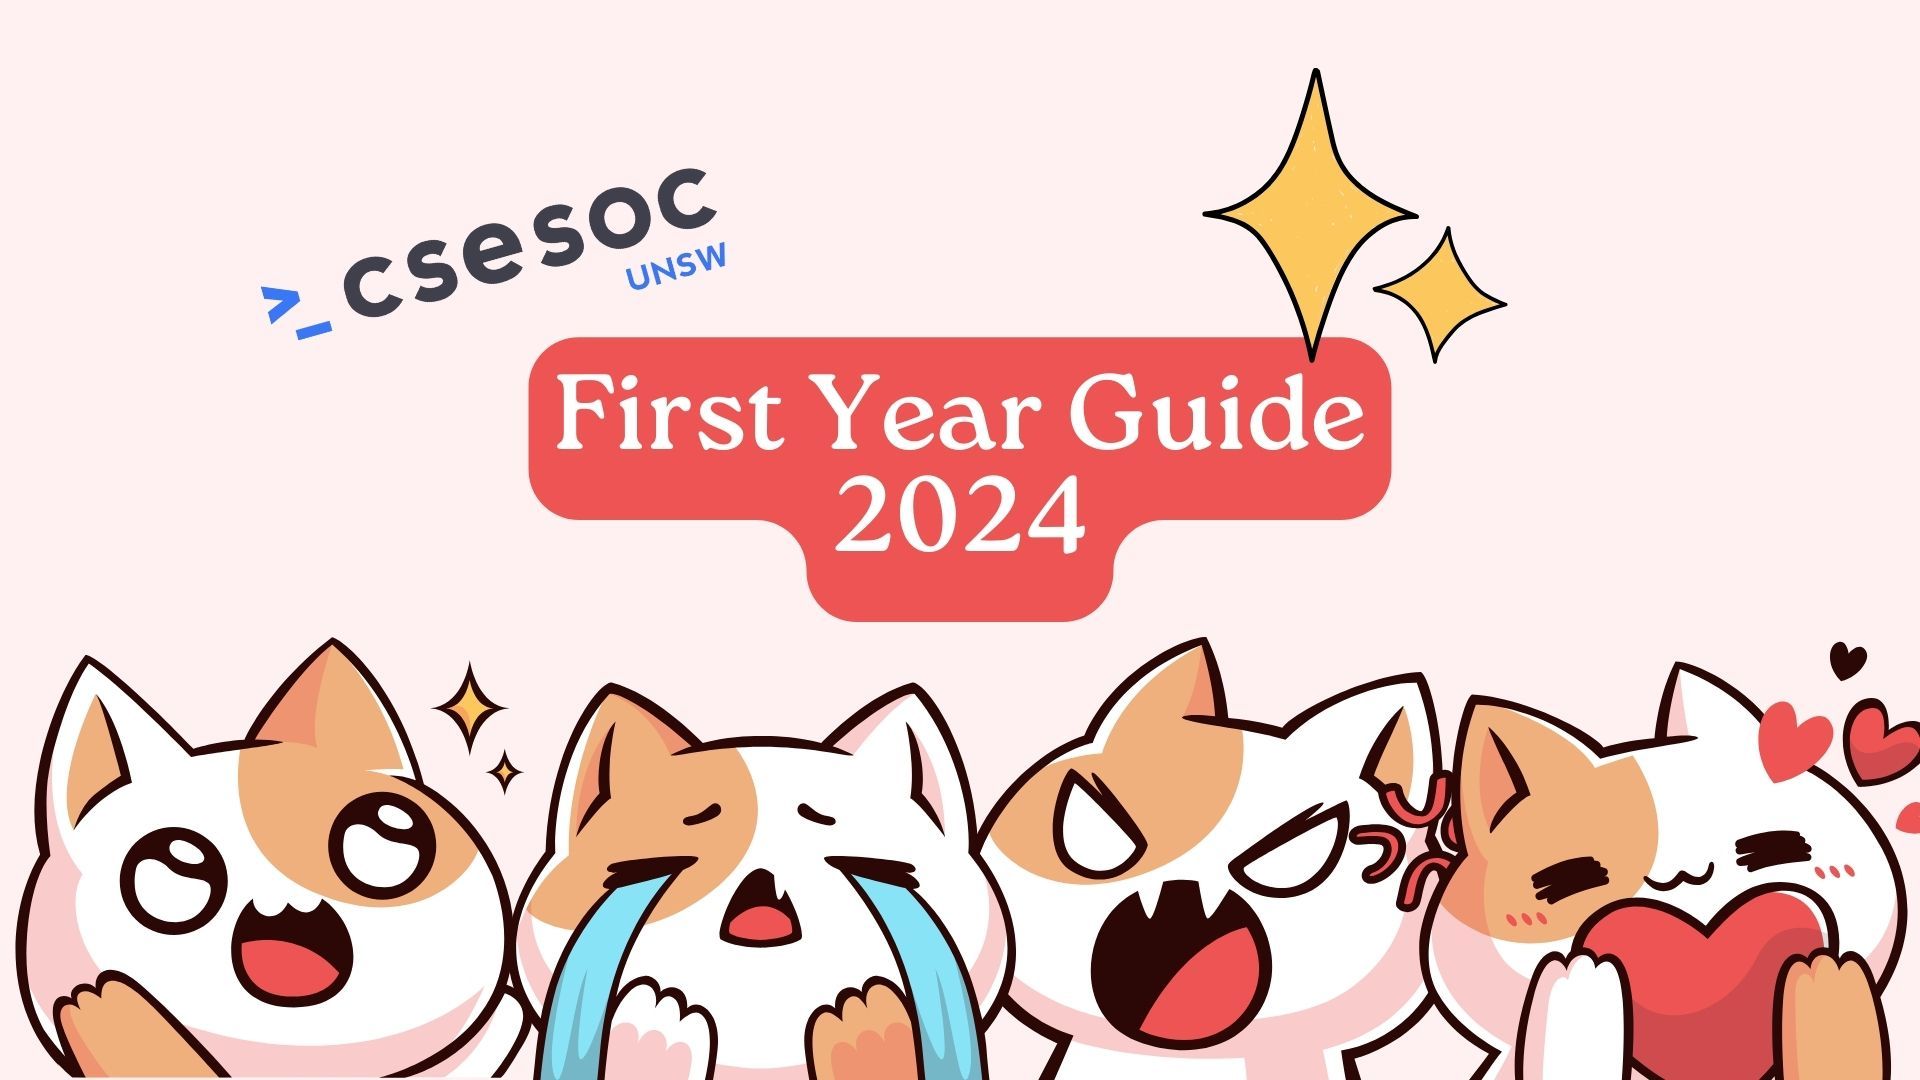 First Year Guide 2024